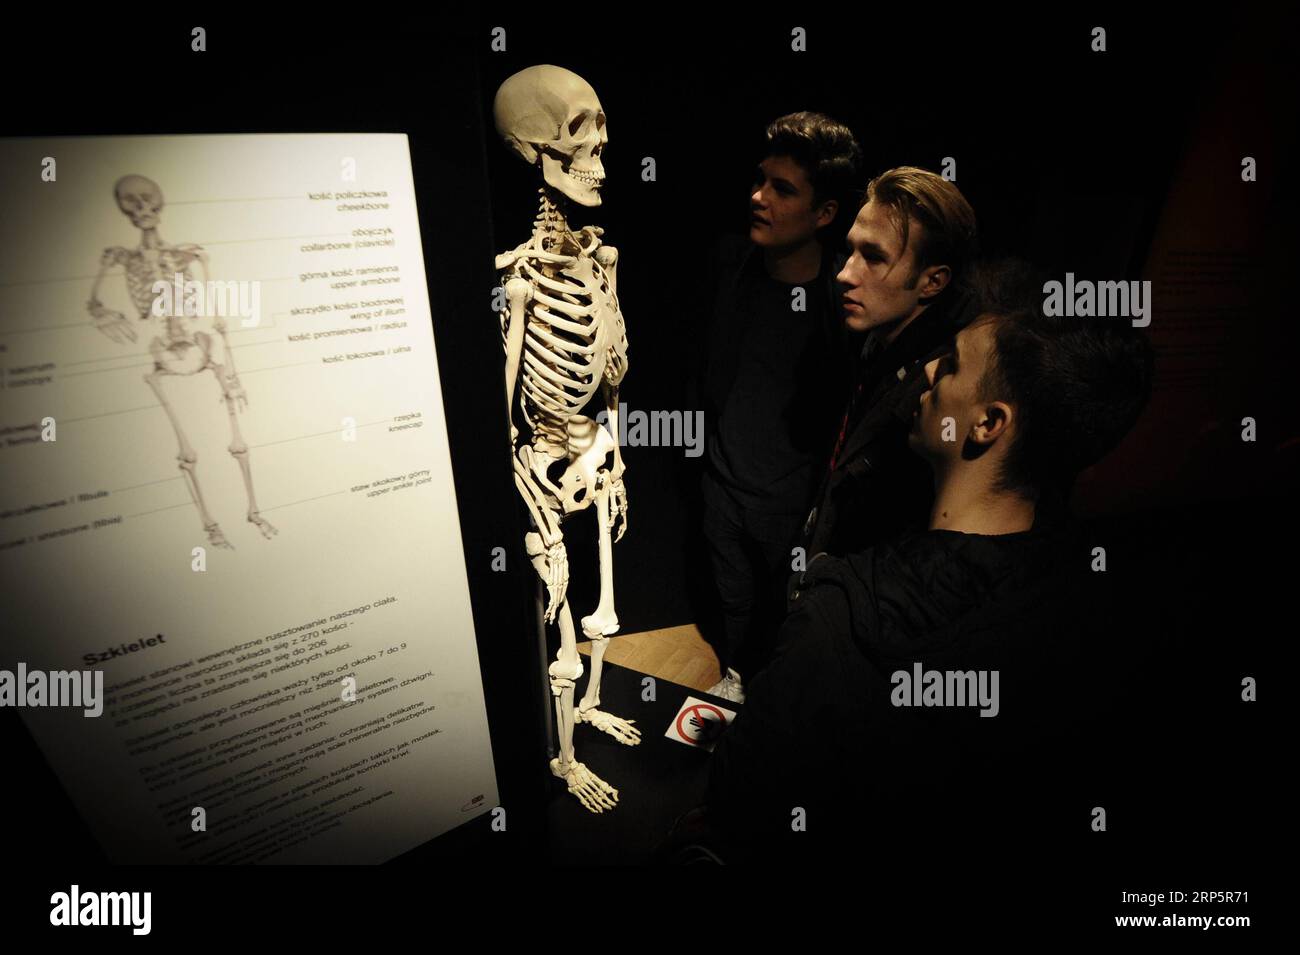 (181221) -- WARSAW, Dec. 21, 2018 -- Visitors look at a skeleton at the Body Worlds exhibition at the Palace of Culture and Science in Warsaw, Poland, on Dec. 21, 2018. The Body Worlds exhibition displays dissected human bodies and animals. It was first presented in Tokyo in 1995. ) POLAND-WARSAW-BODY WORLDS-EXHIBITION JaapxArriens PUBLICATIONxNOTxINxCHN Stock Photo